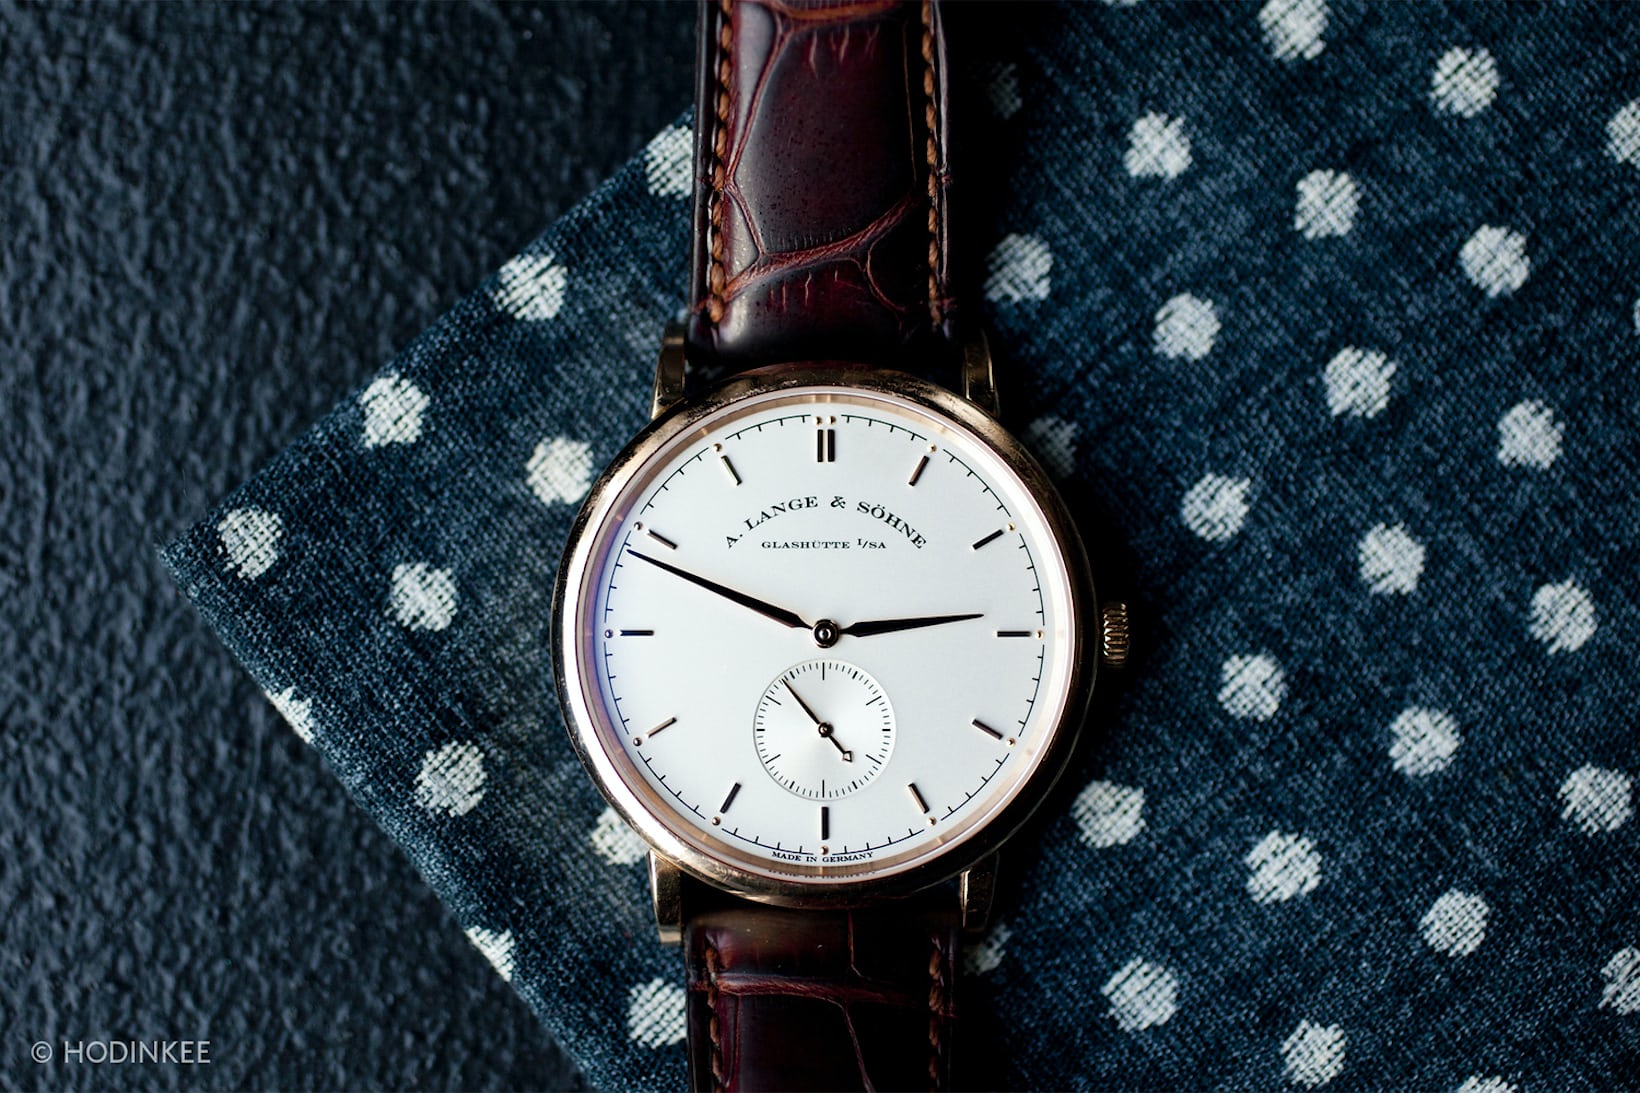 Everest Journal The Beautiful Simplicity of Time-Only Watches